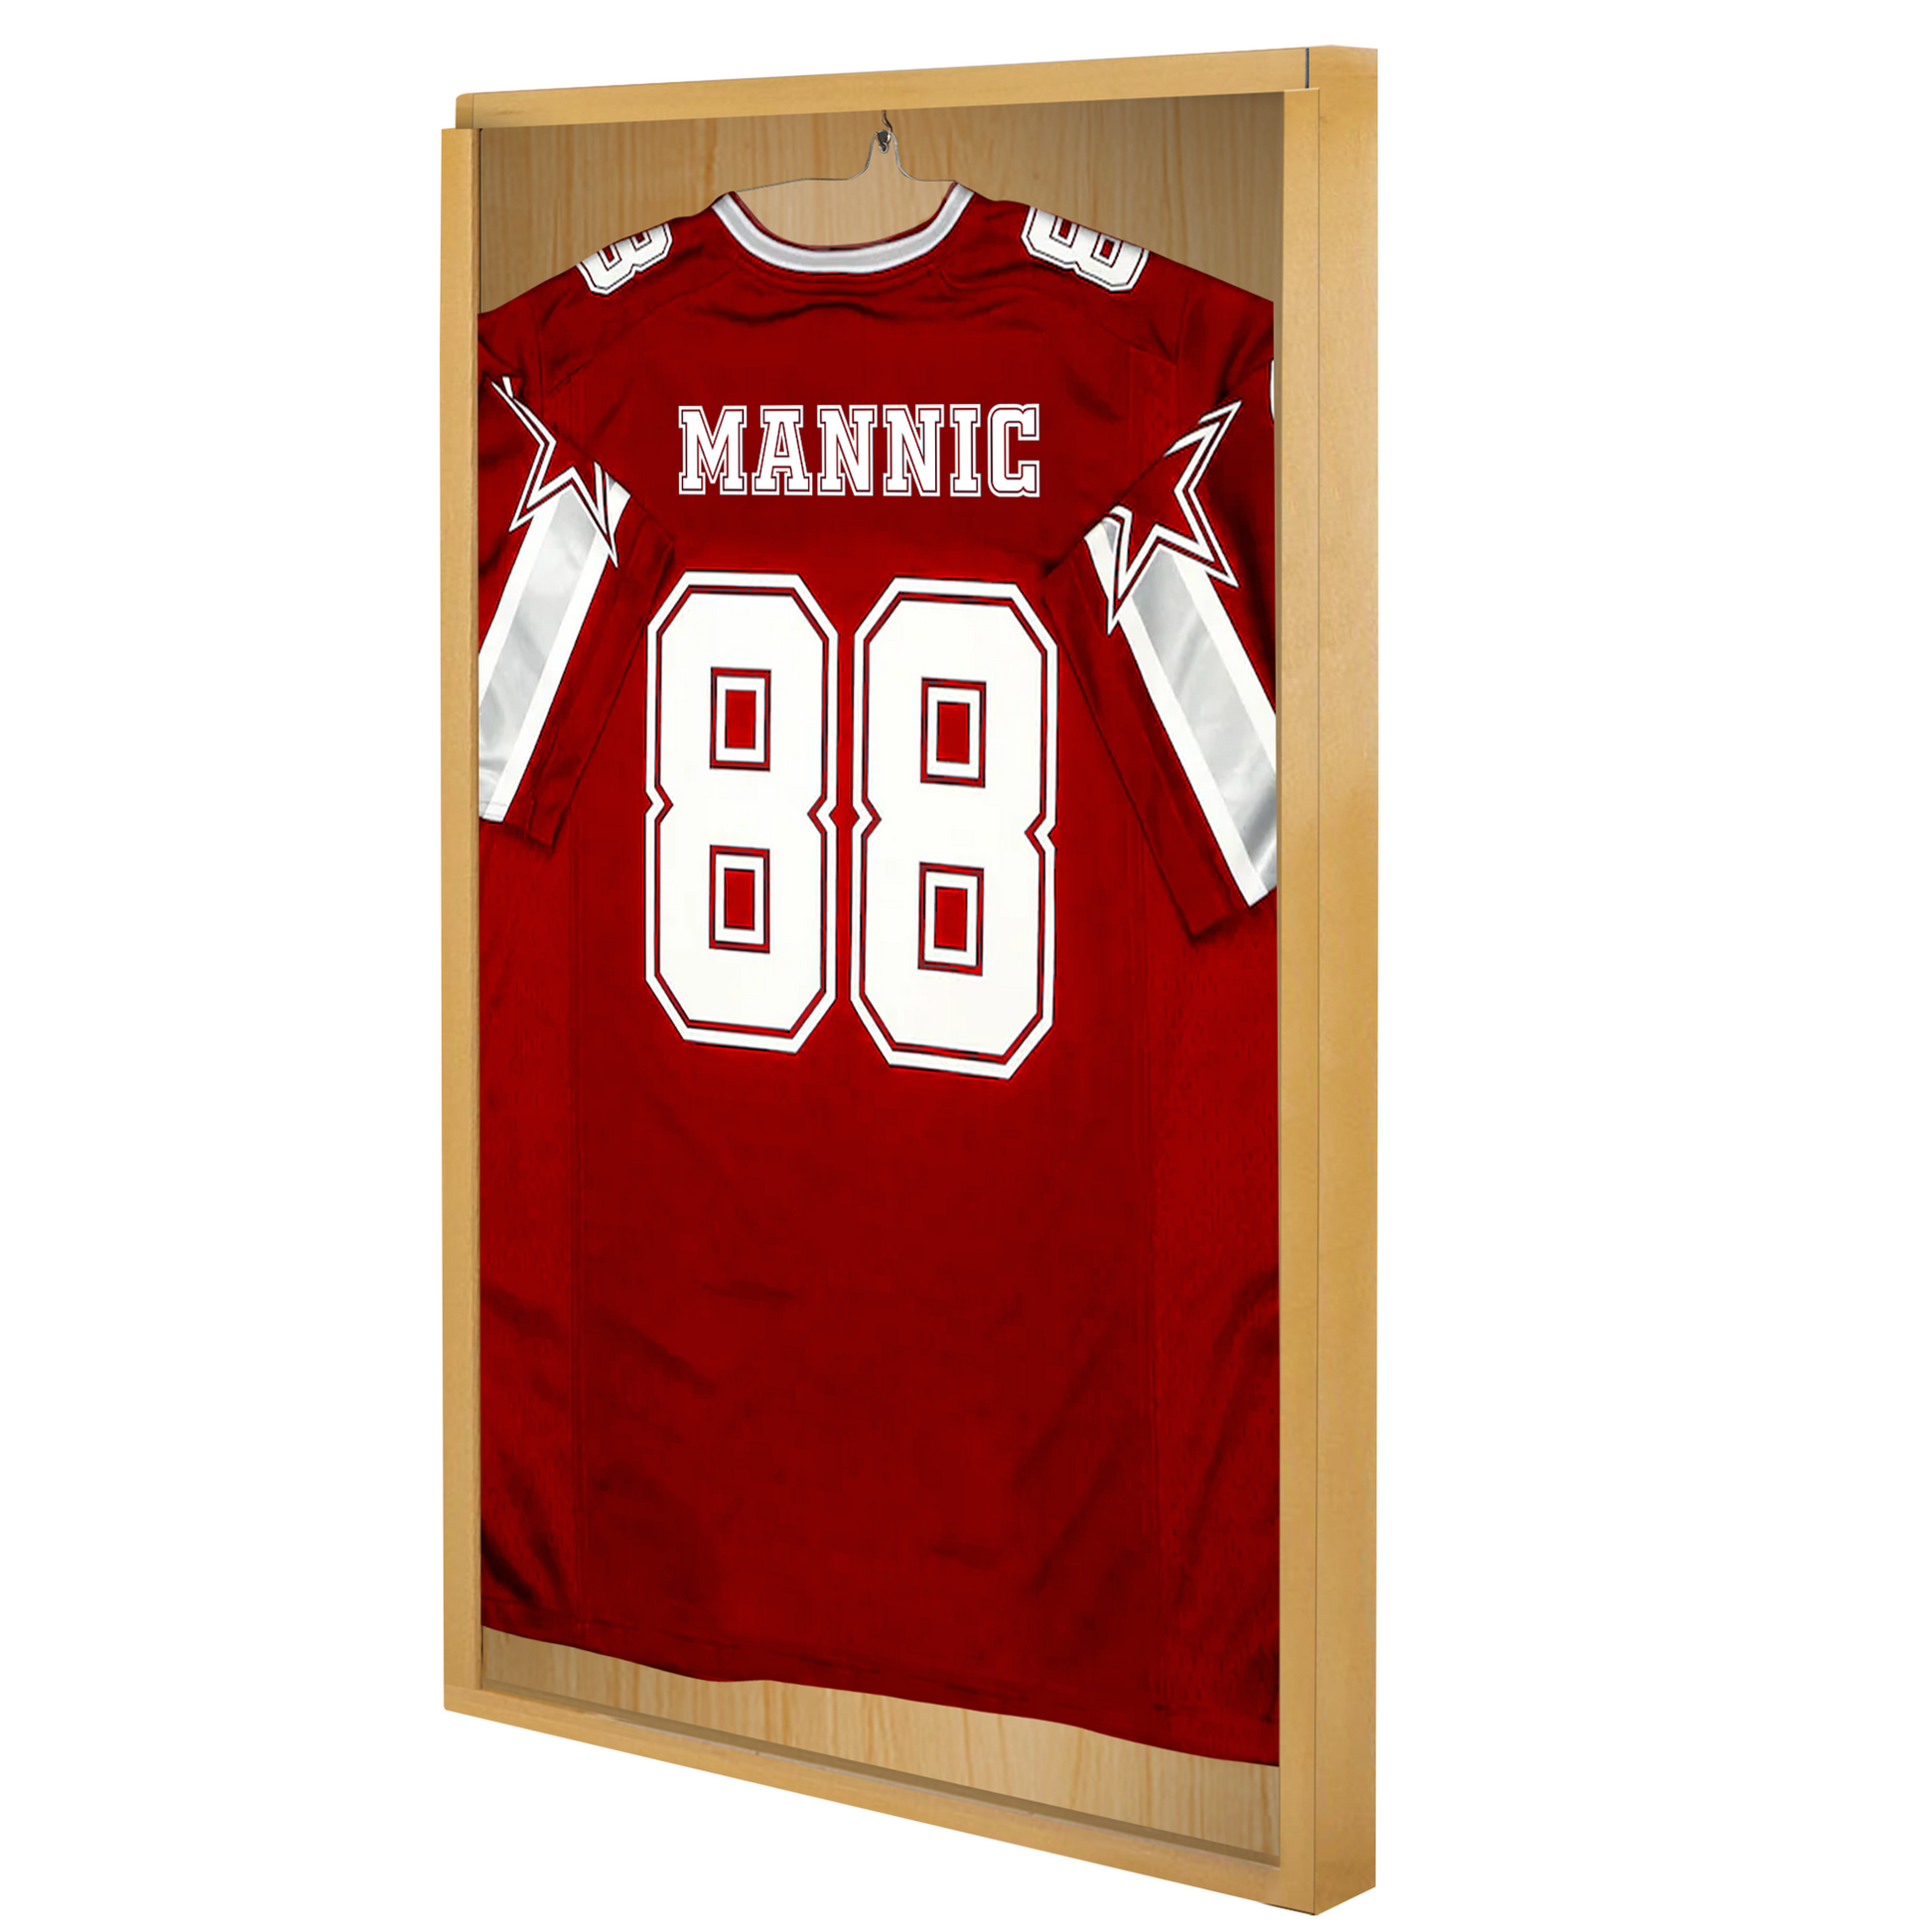 PENNZONI Jersey Frame Display Case - Jersey Cabinet, Small Size